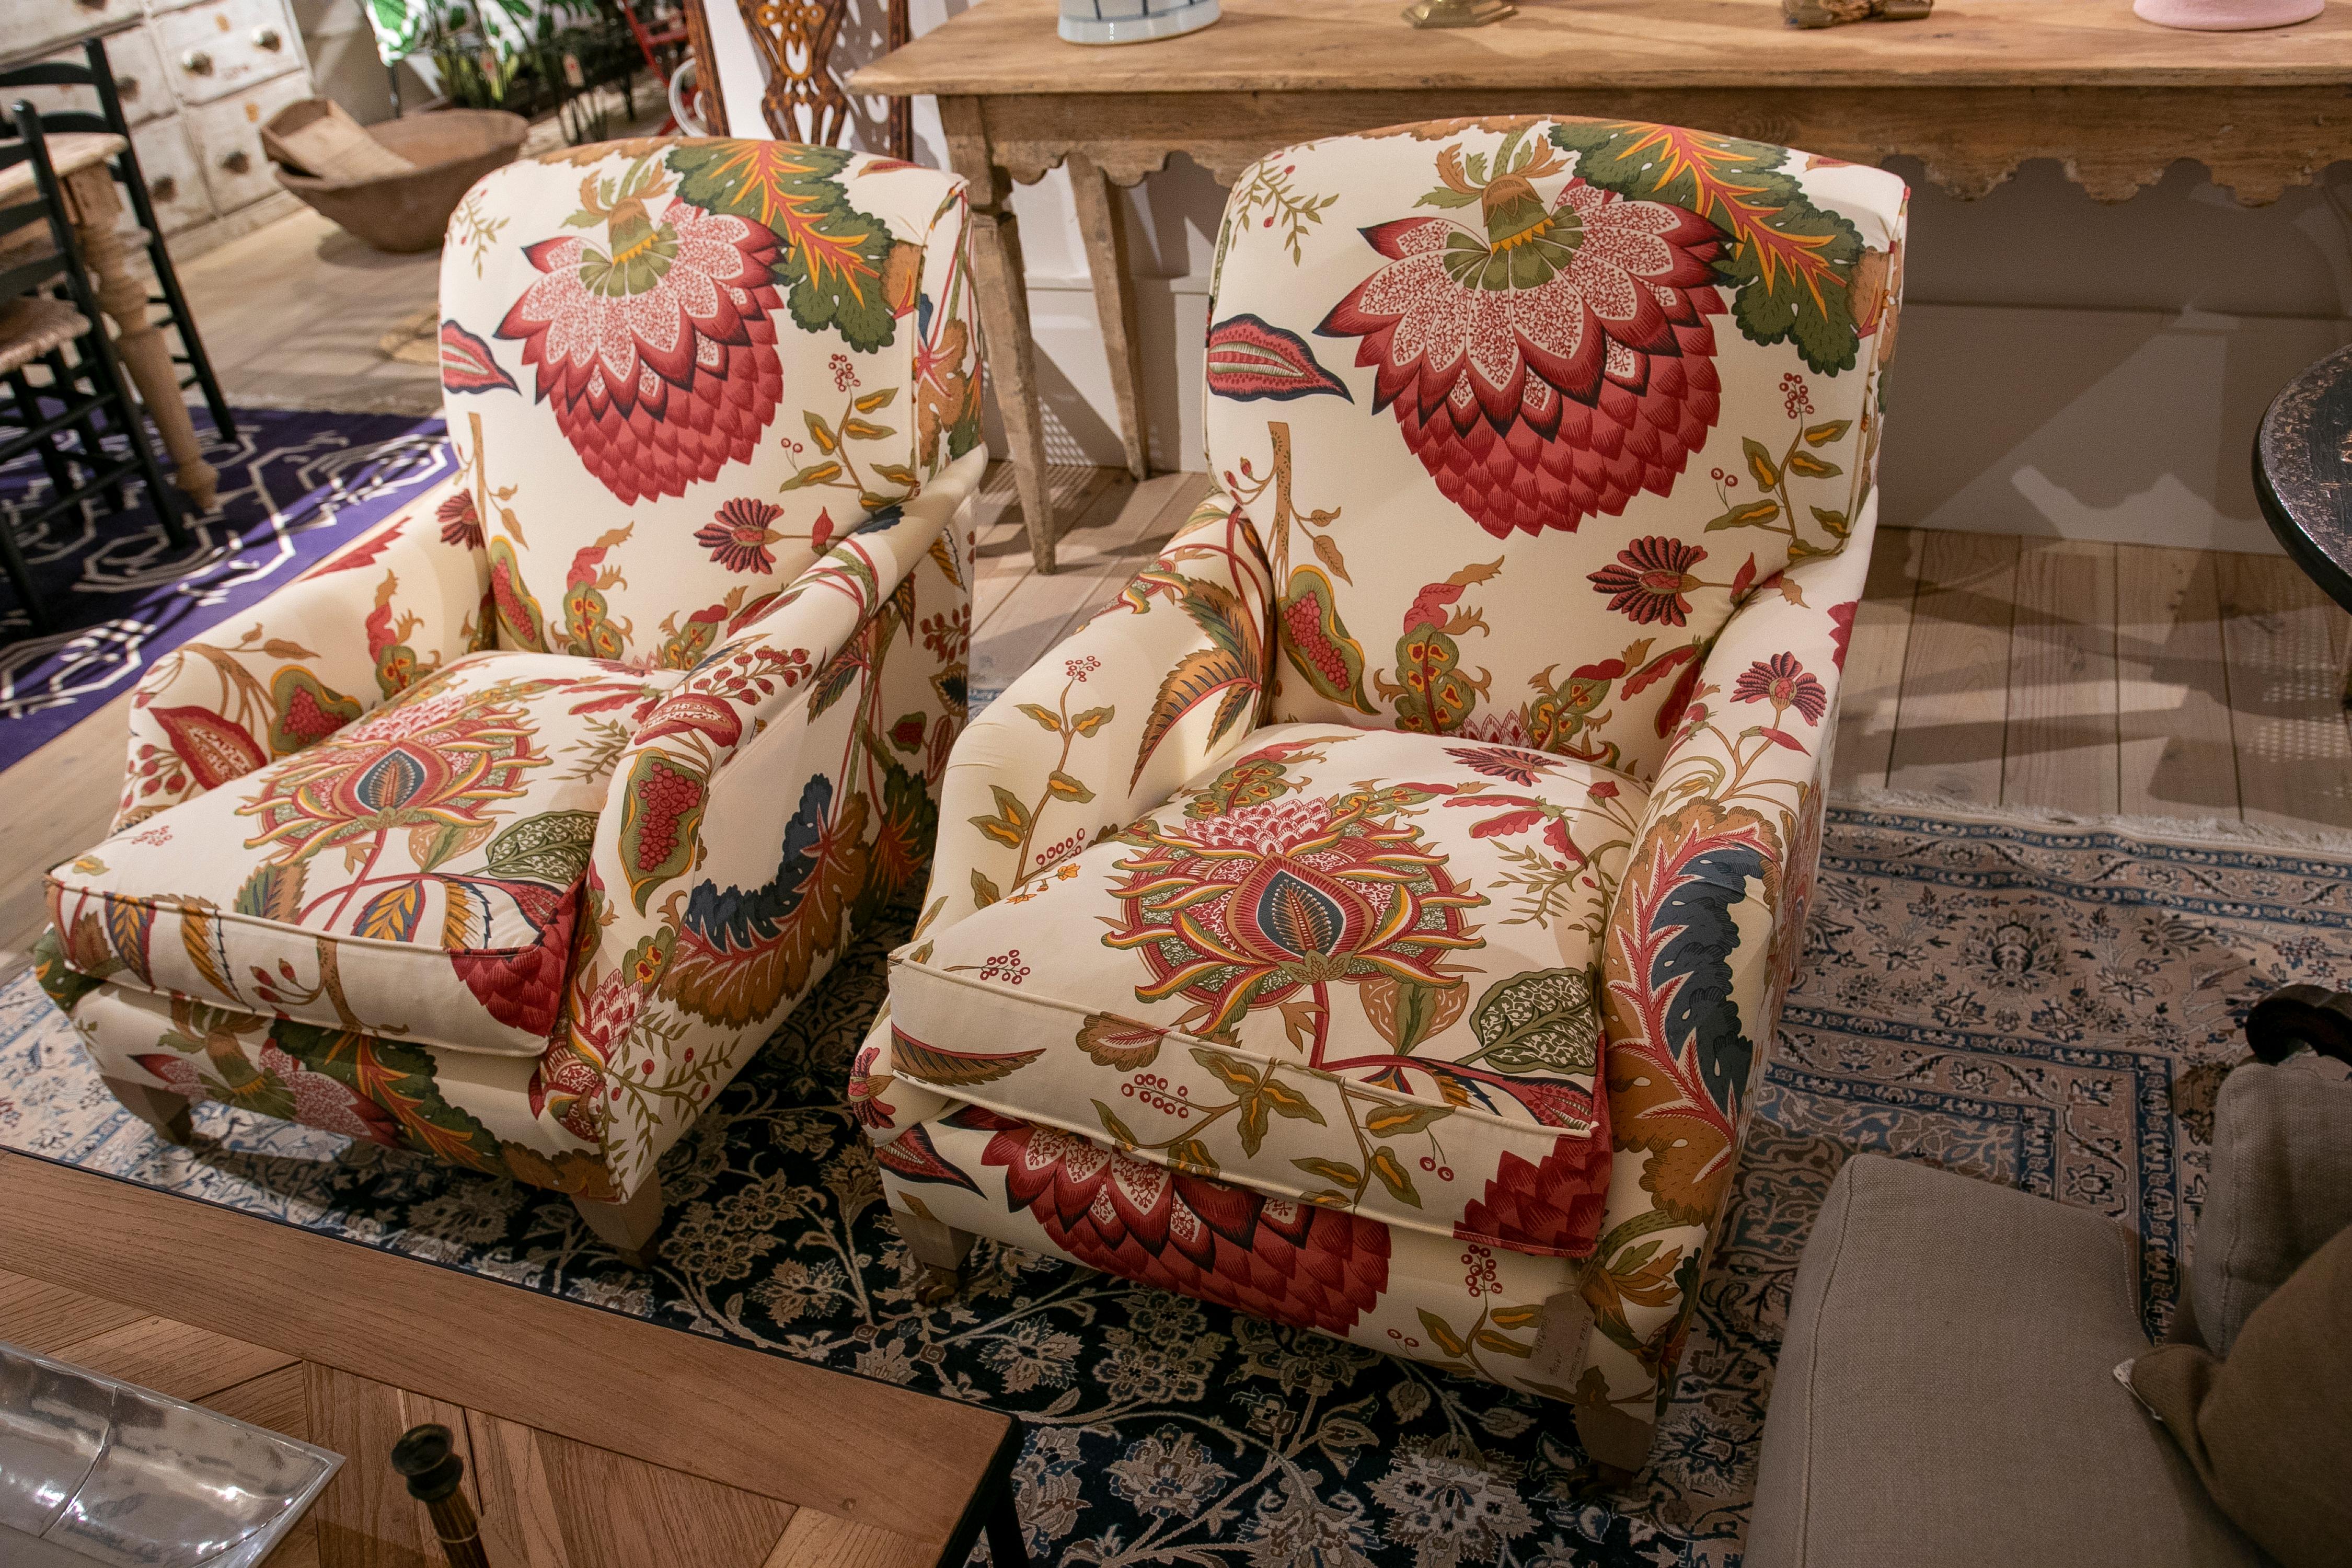 Pair of armchairs with wooden structure and Gaston&Daniela's upholstery. As unique details, the armchairs have small wheels at the end of the legs like the old classics and the fabric has an exotic design in warm colors.